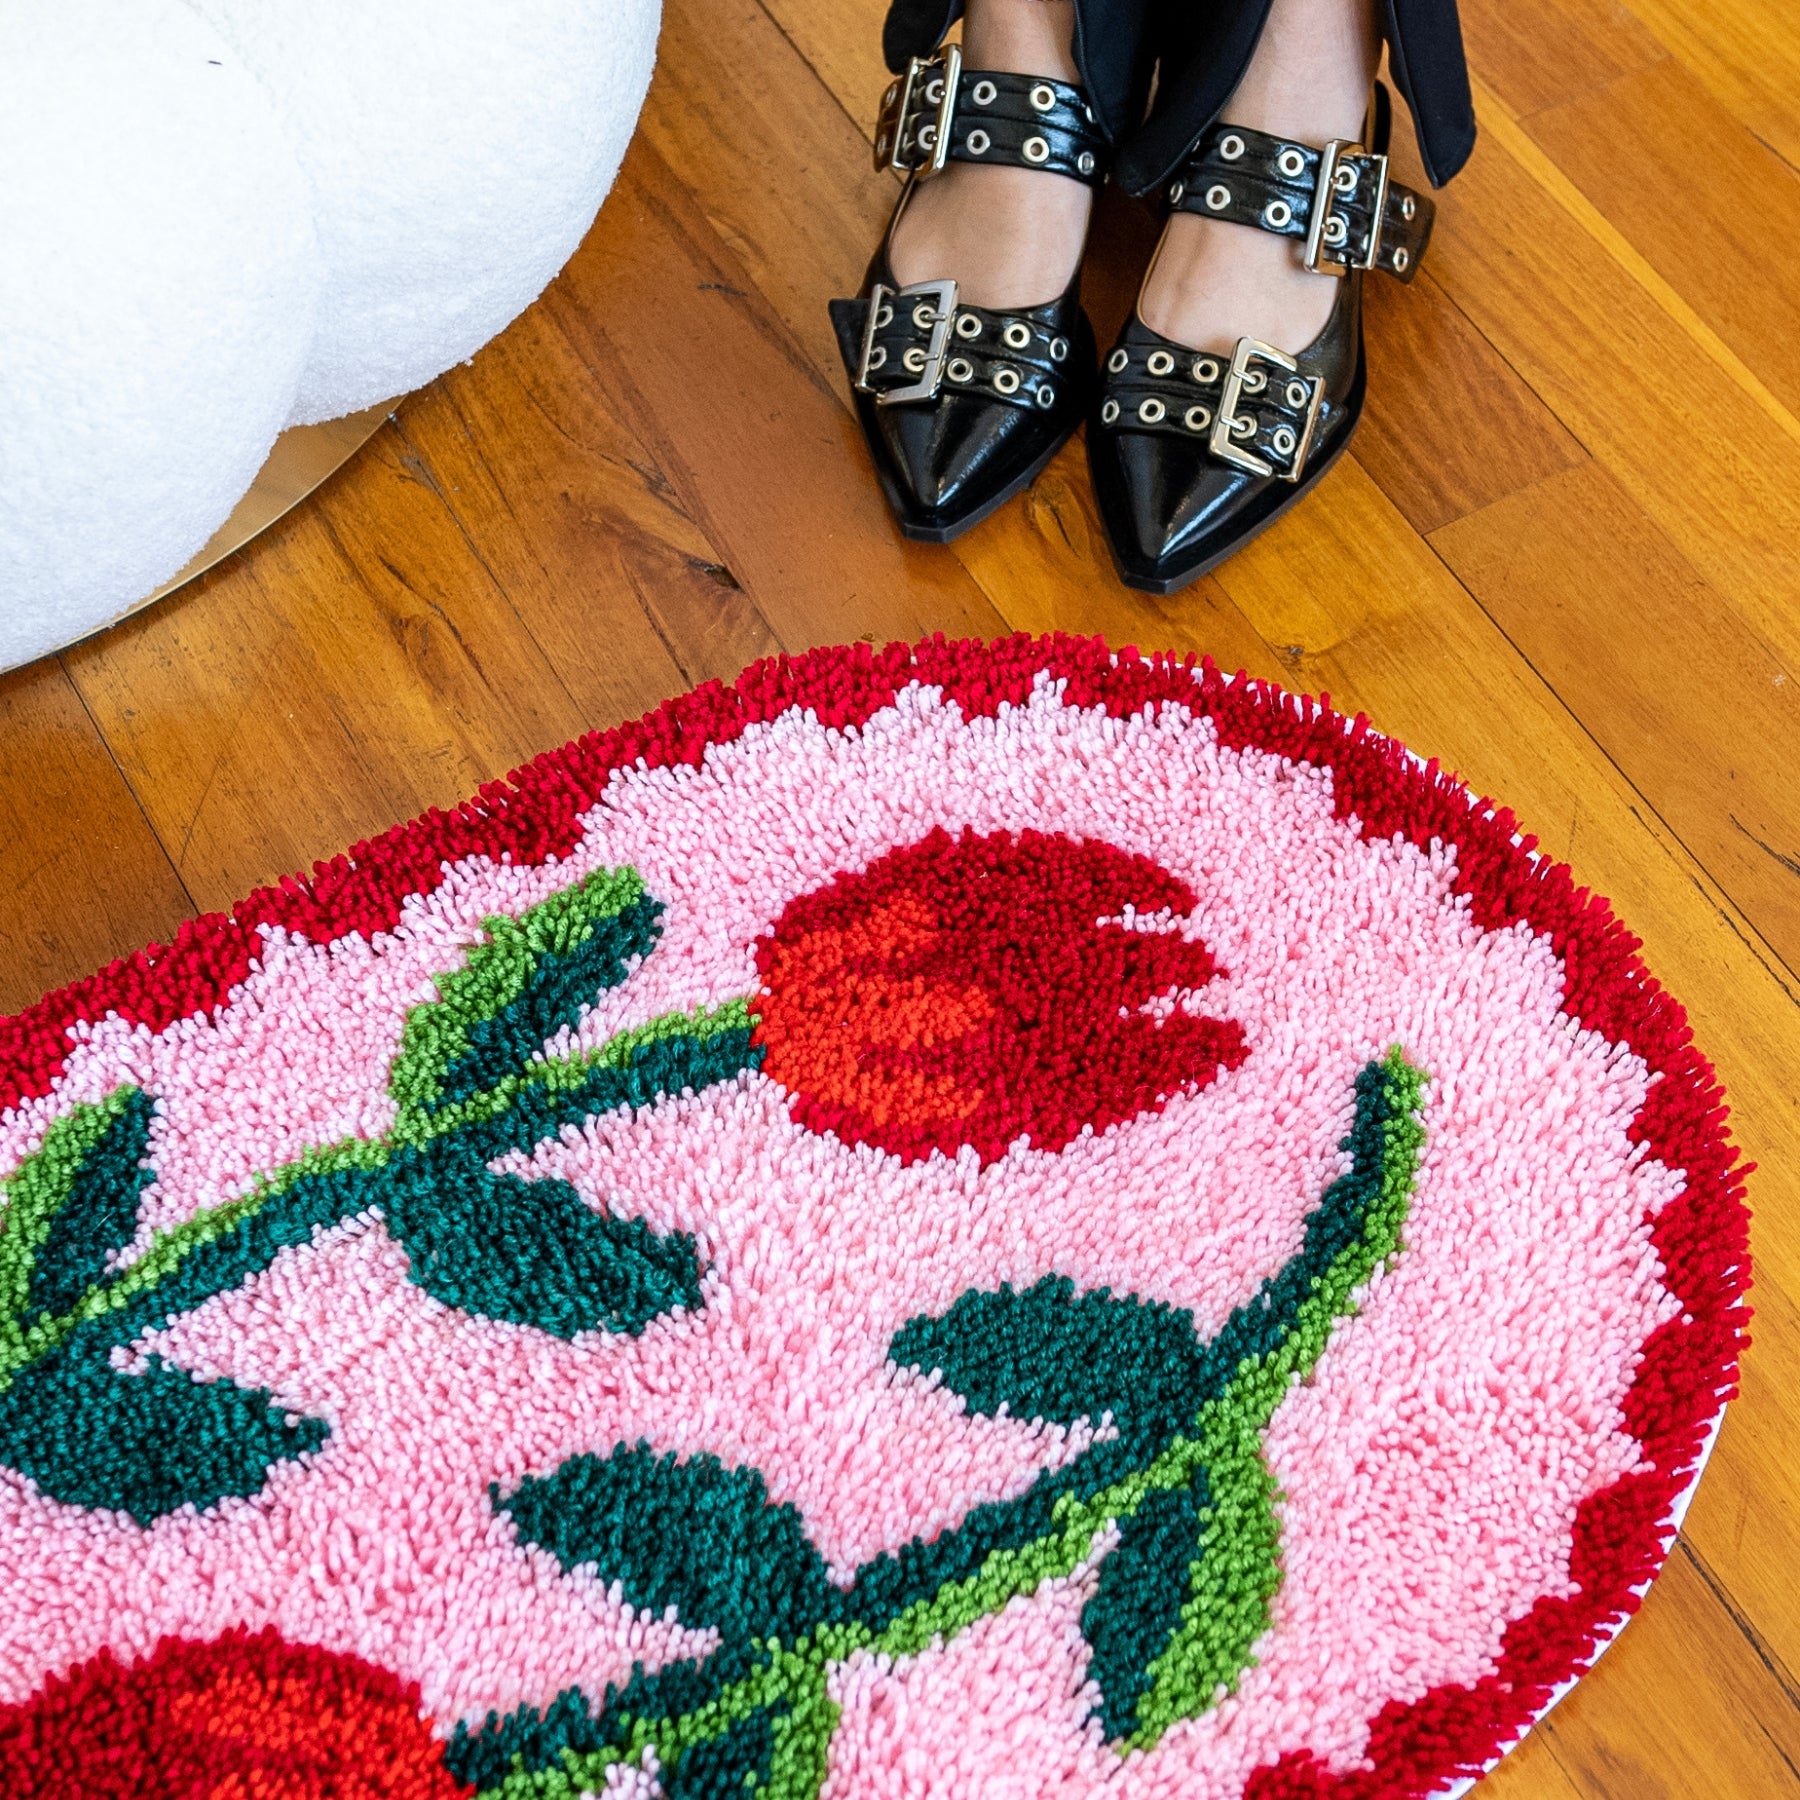 A large latch hooked rug sits on the floor next to a coffee table and chair. The rug has two tulips on it in creamy and brown colours. A persons feet in buckled shoes stands next to the rug.